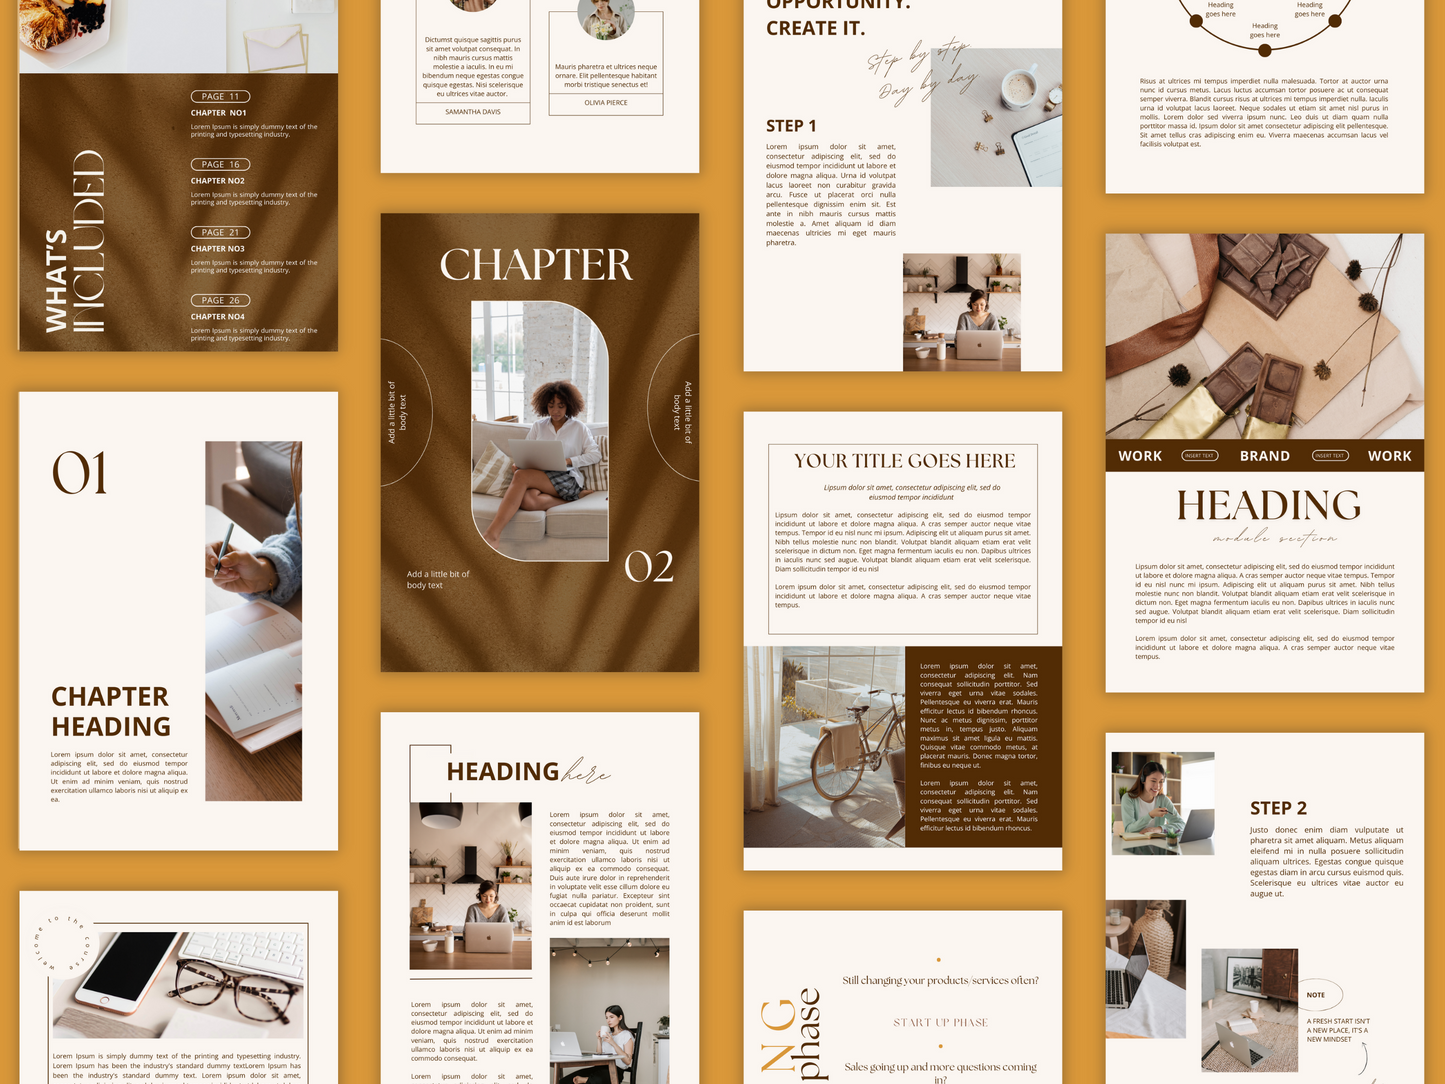 eBook Template PLR for resell, Editable in Canva, Workbook pages included